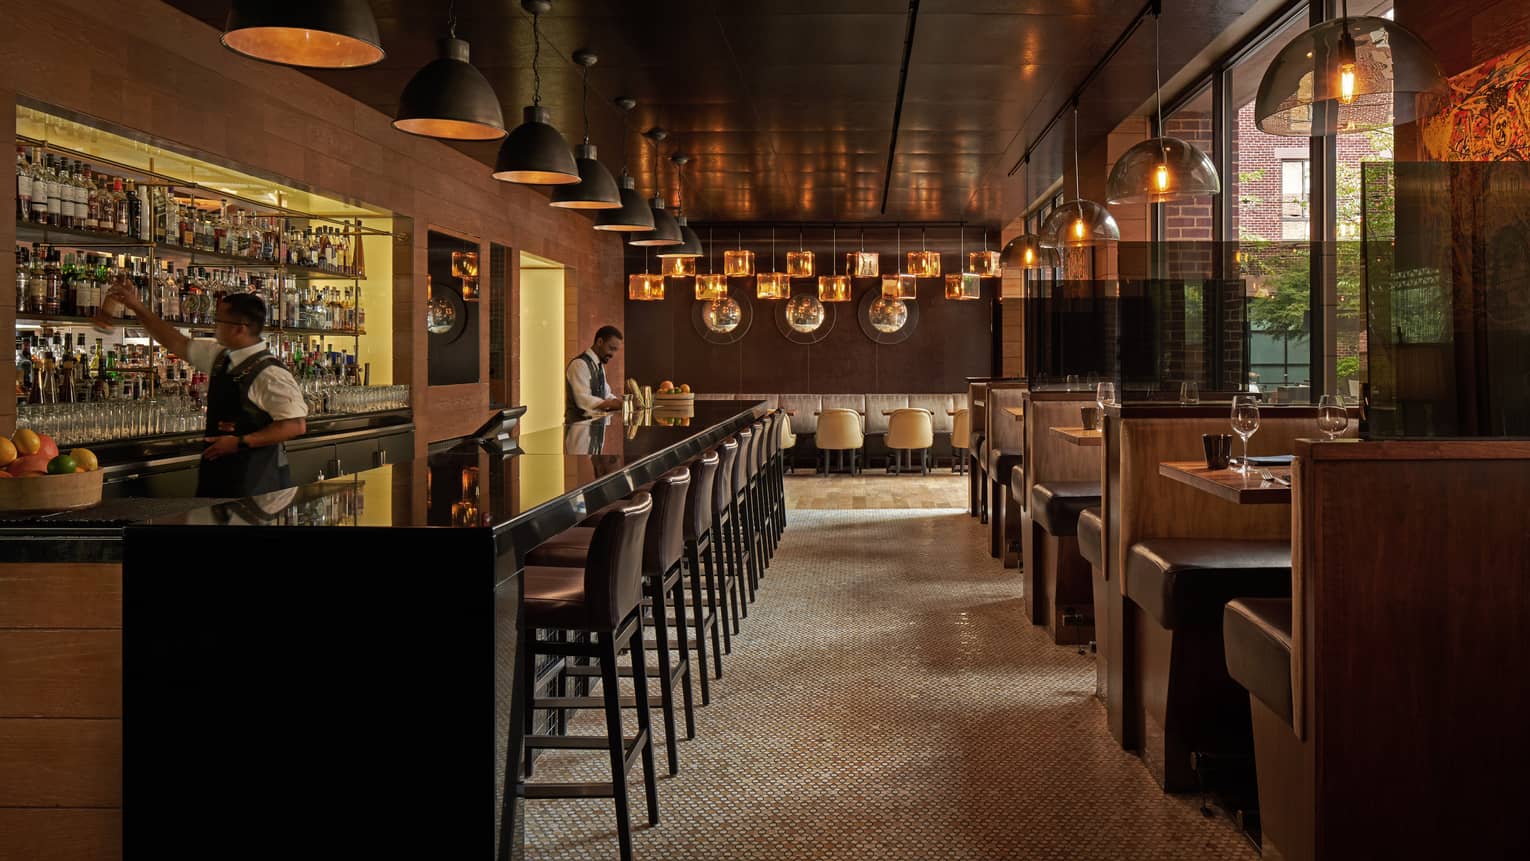 A dimly lit bar with dark wood stools and booths.